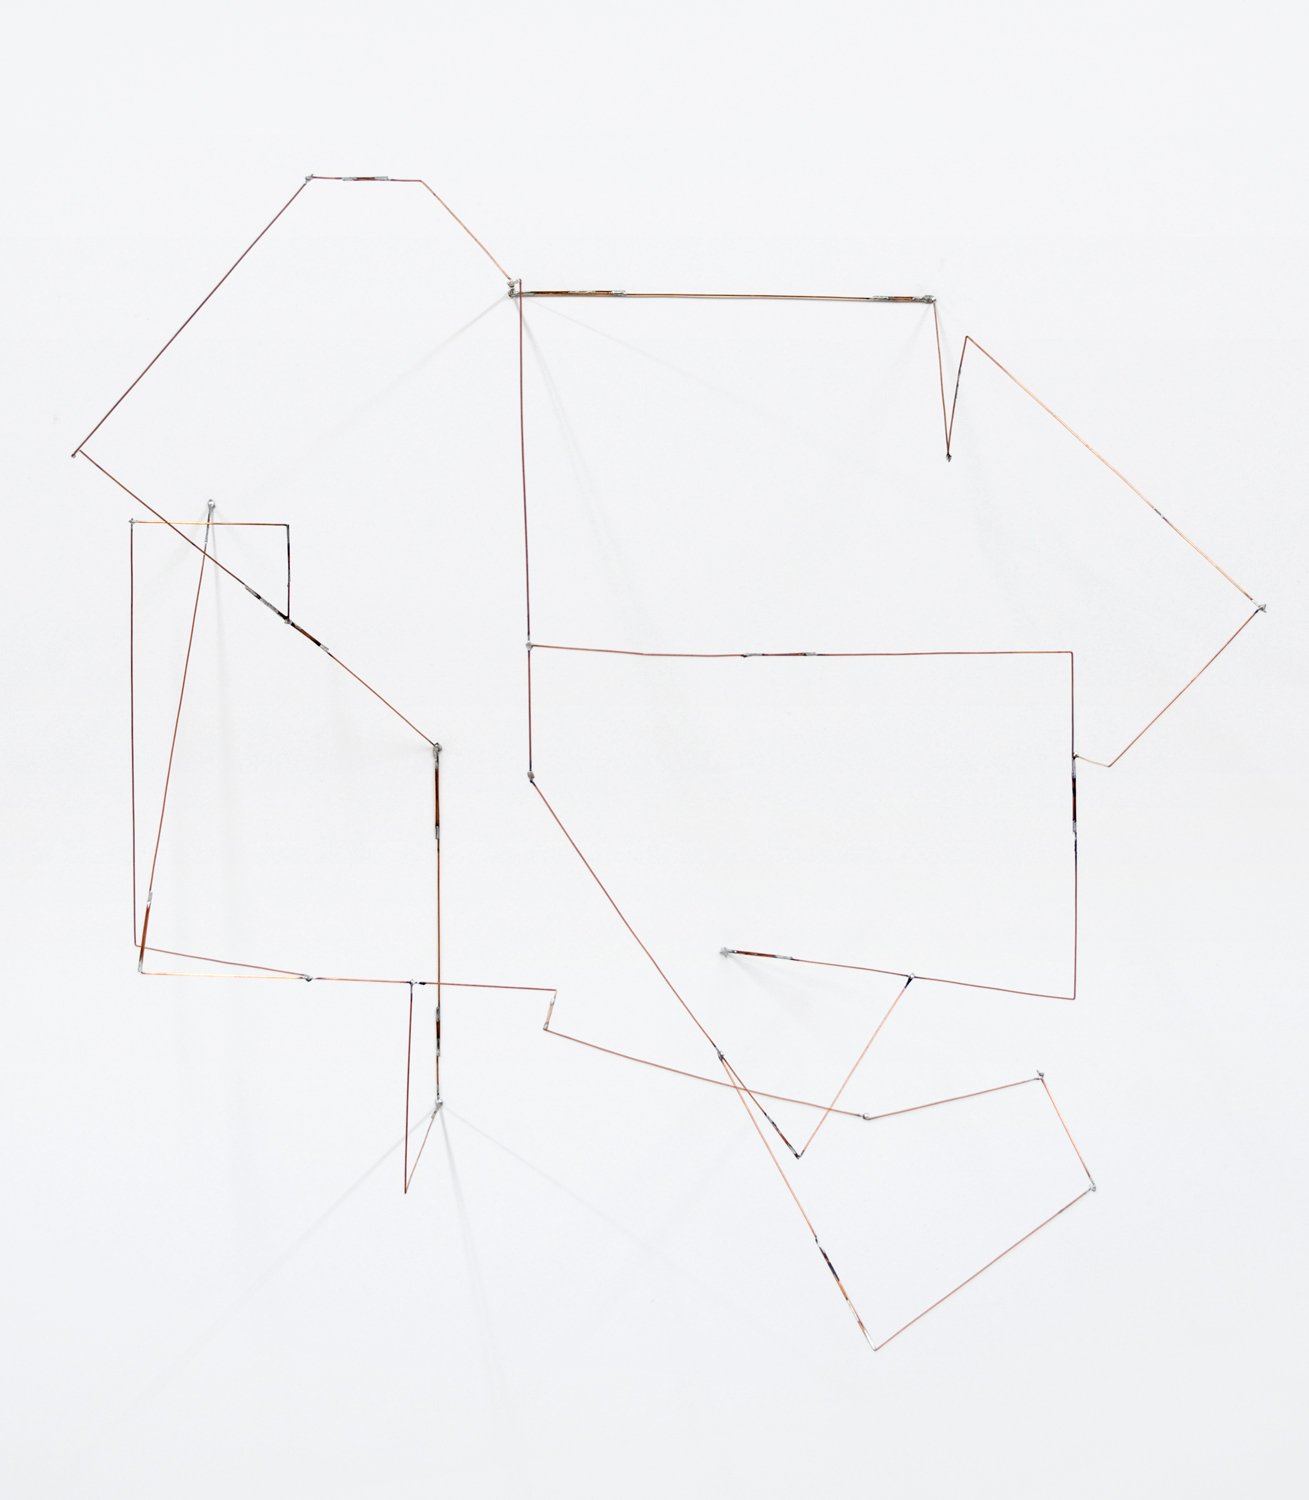   Miniph , 2022, soldered copper-coated steel wire,&nbsp;19 x 20 x 15 in 